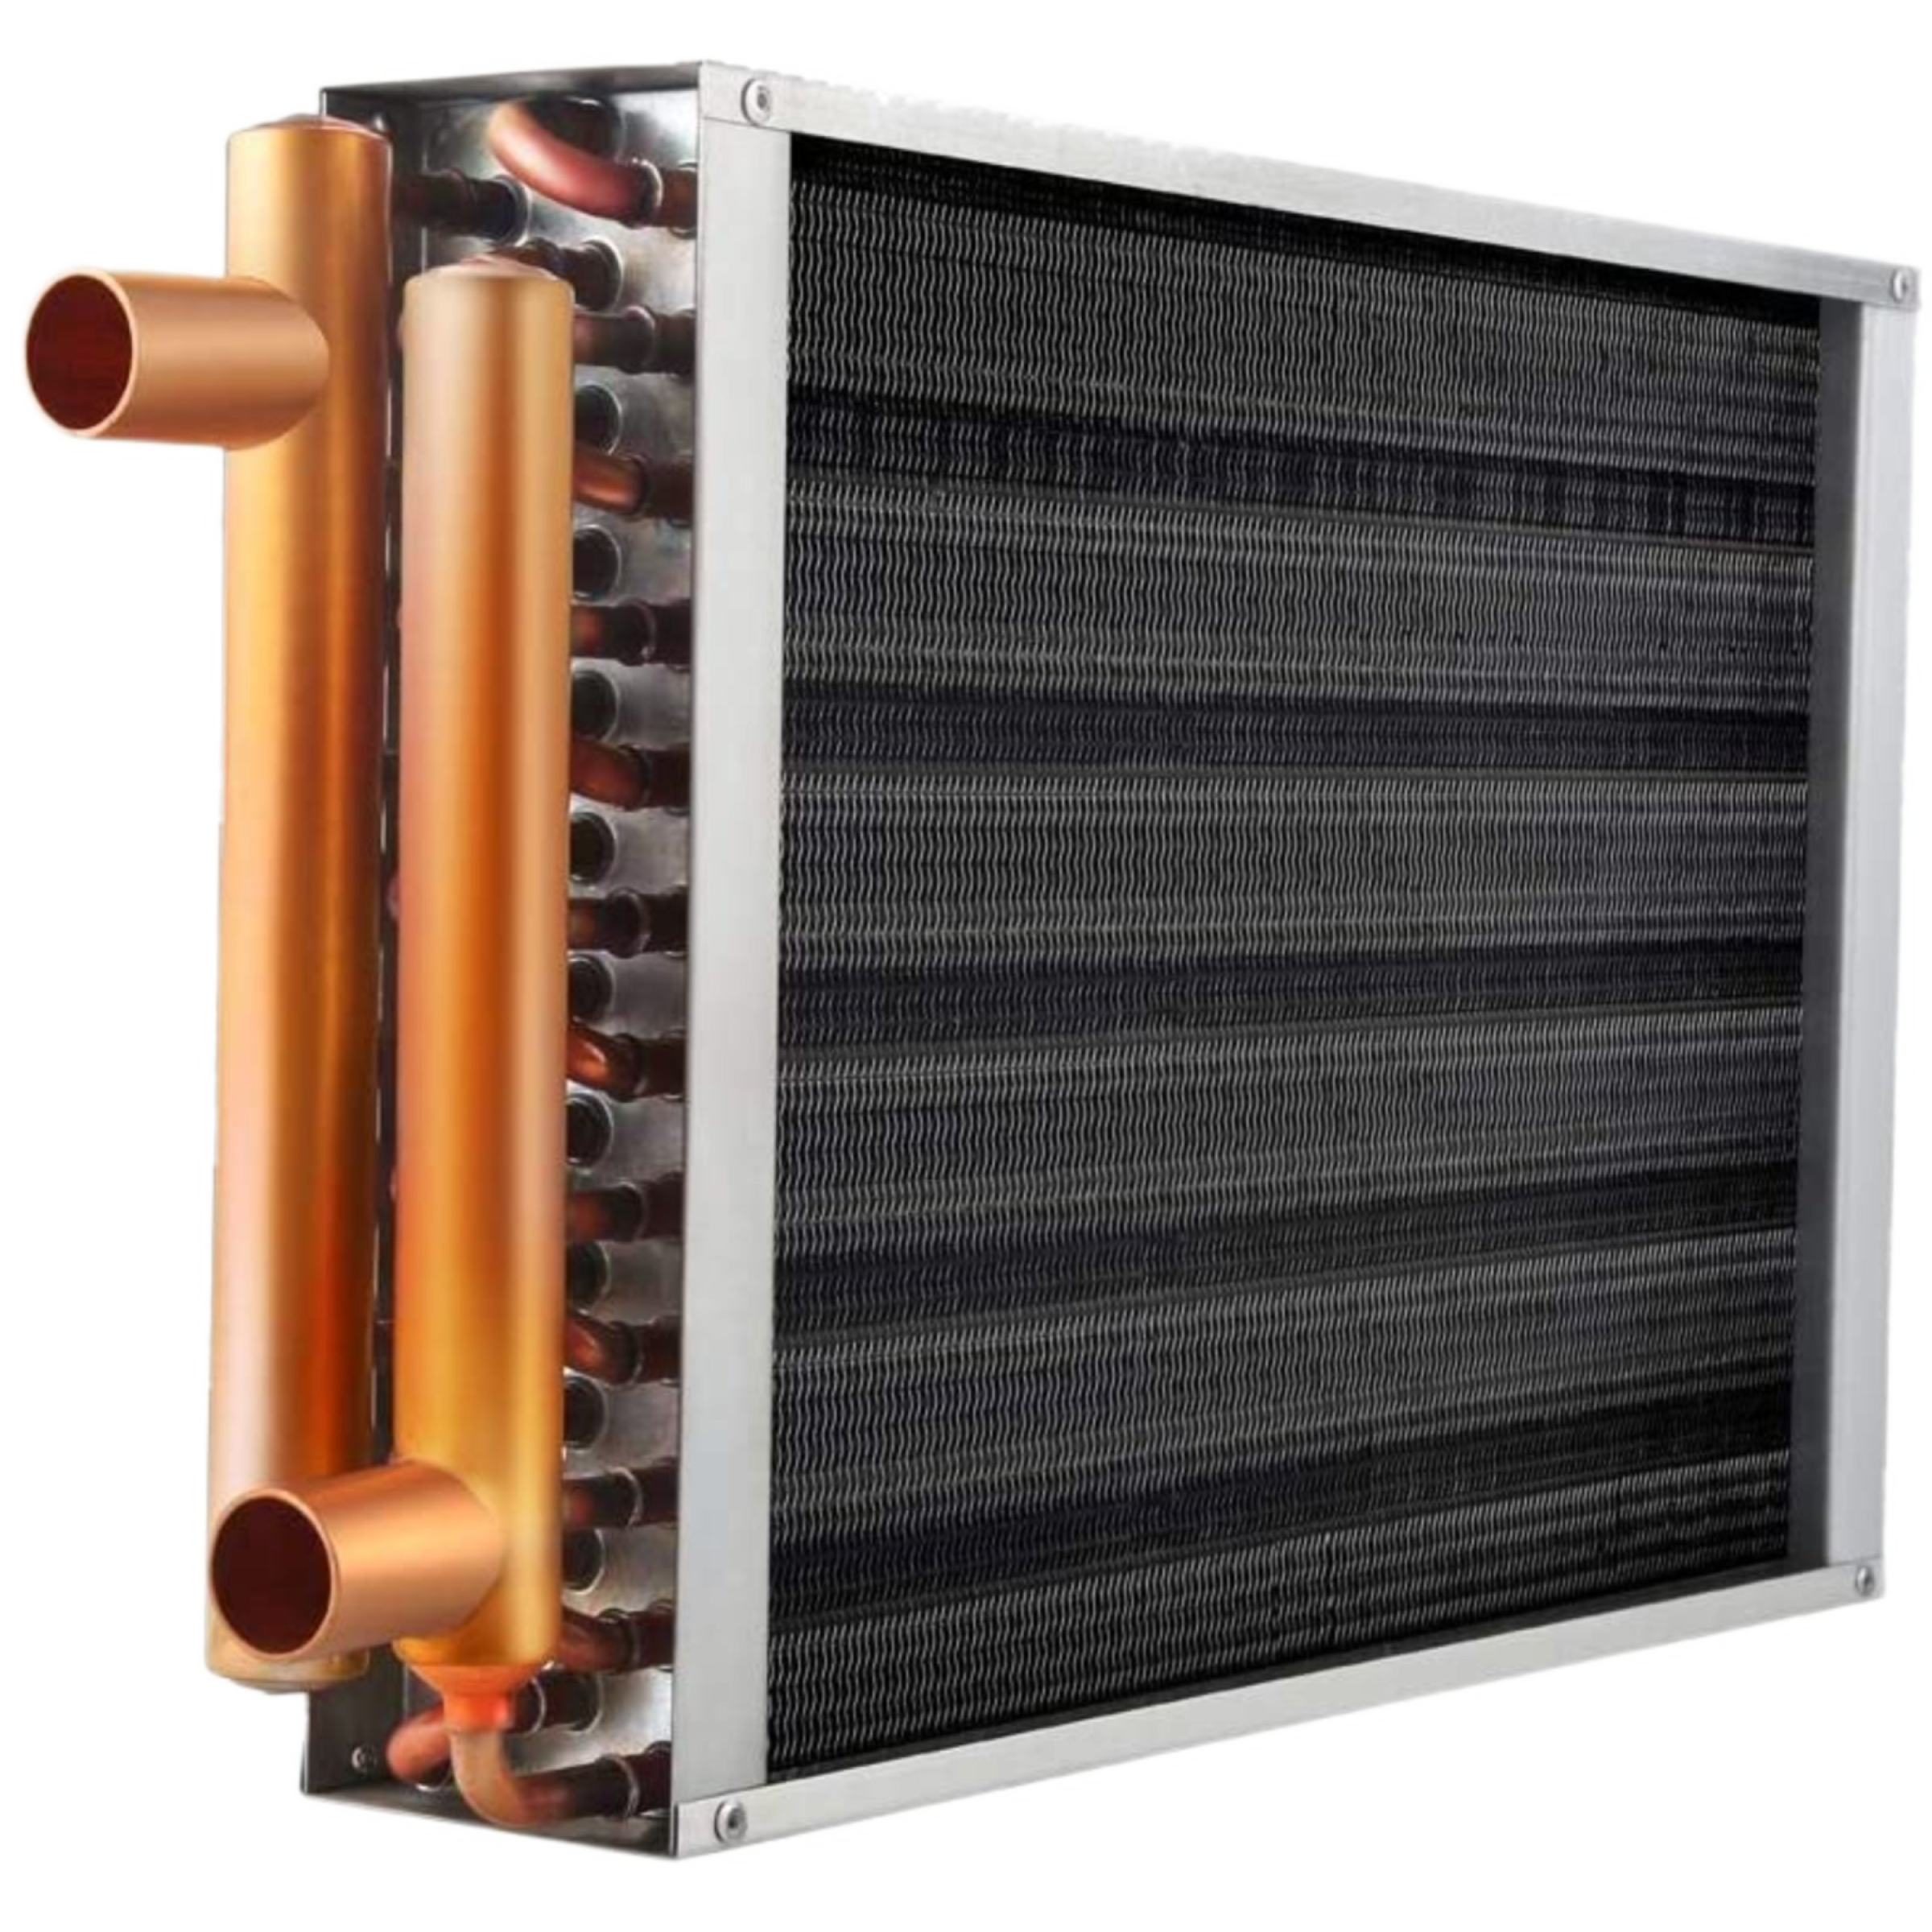 HTL 18 X 18 Hydronic Coil Air to Water Heat Exchanger 12GPM, PD 0.91 PSI, 111375 BTU/h to 120000 BTU /h